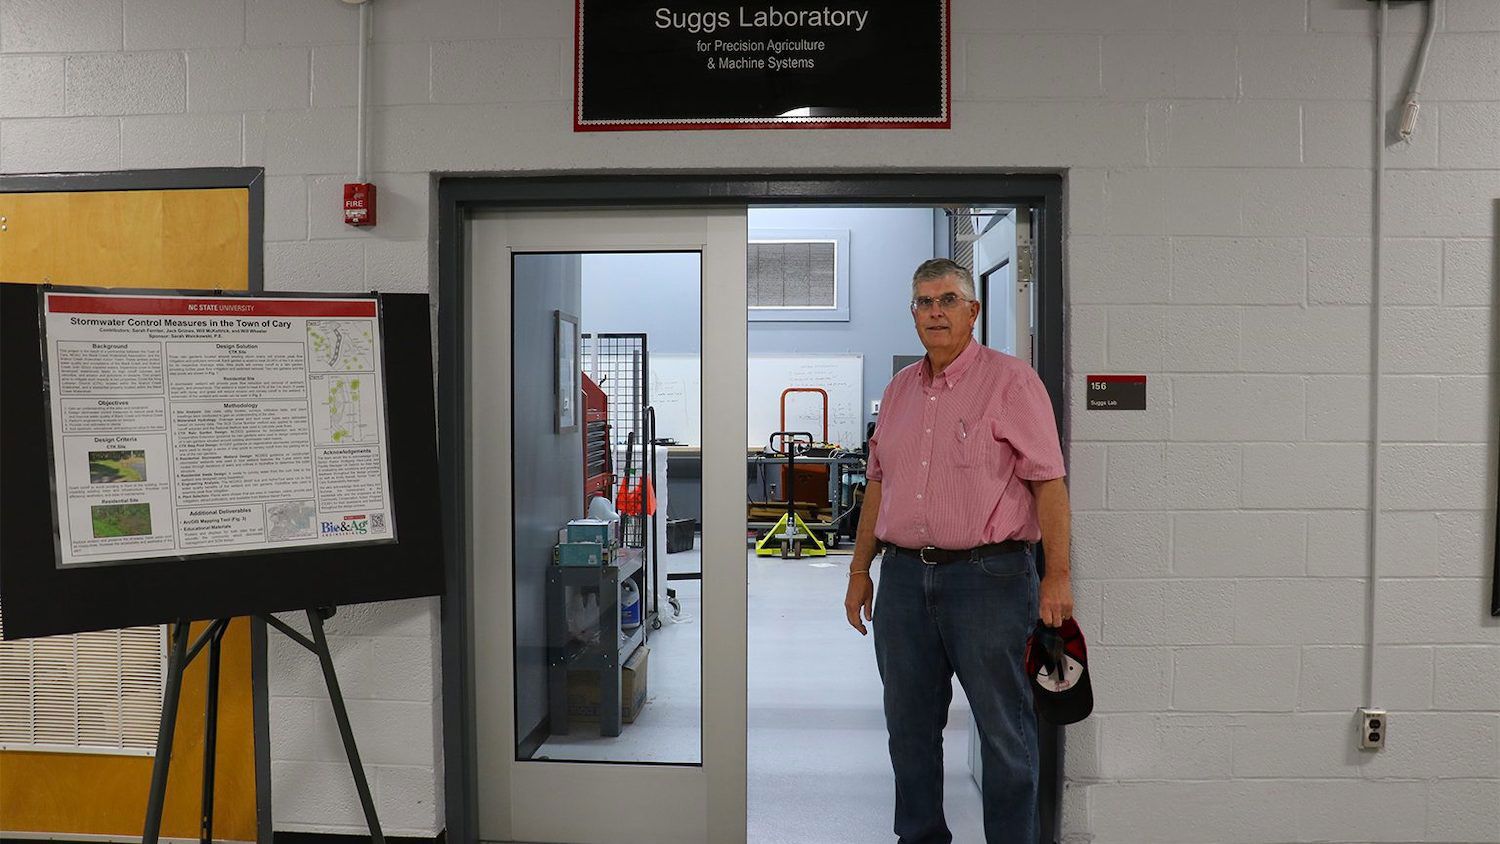 Gary Roberson in front of the Suggs laboratory